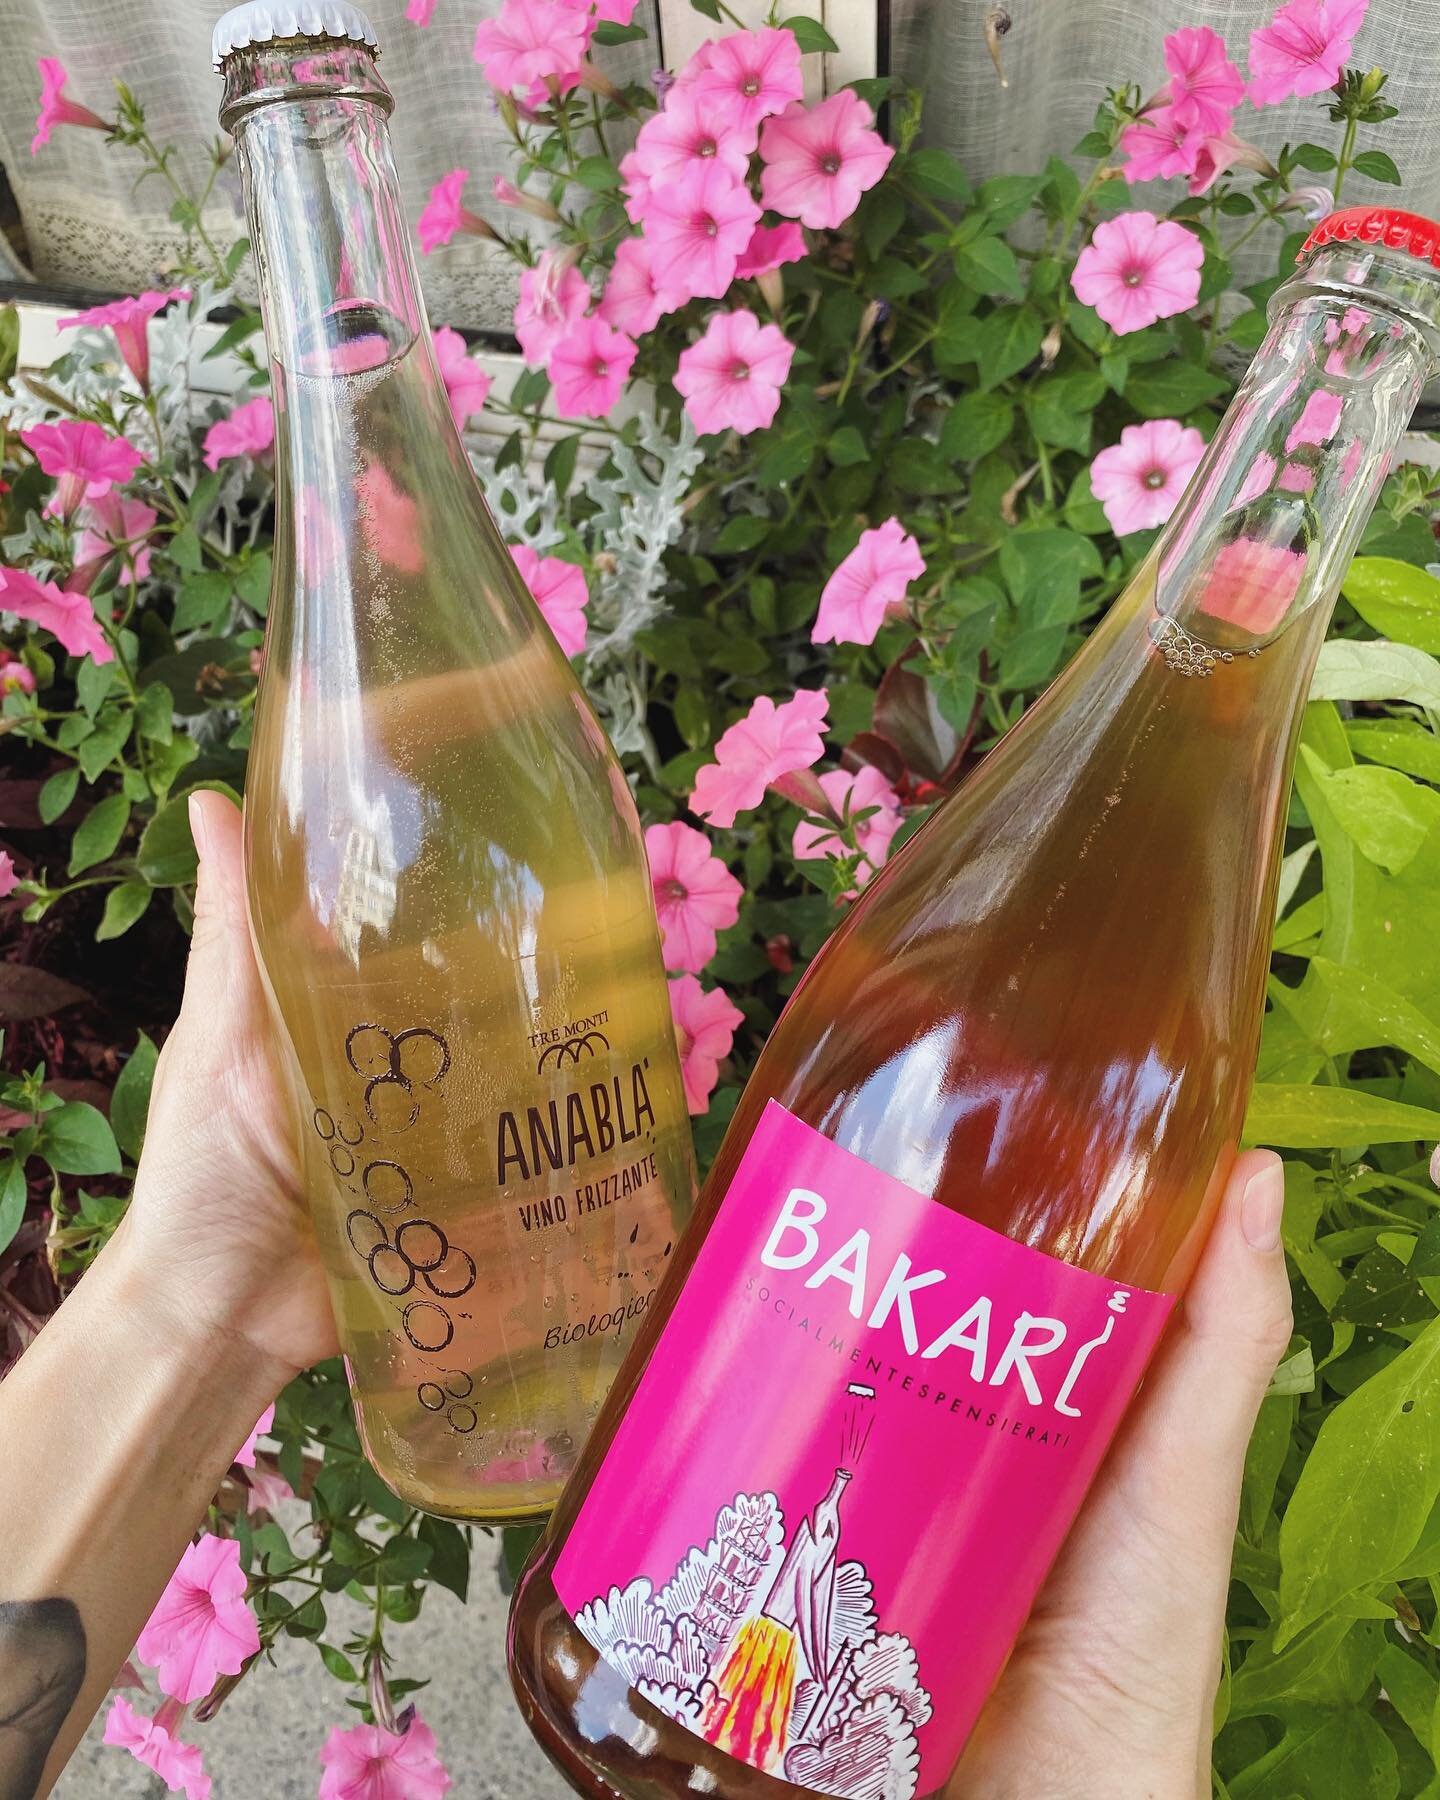 Great things come in pairs! ⠀
Natural sparkling Rose from Veneto and organic Pet Nat from Emilia-Romagna are both fresh and fruity with just right amount of dryness to keep you drinking on this beautiful sunny day! 🥂☀️

#italianwines #org&aacute;nic